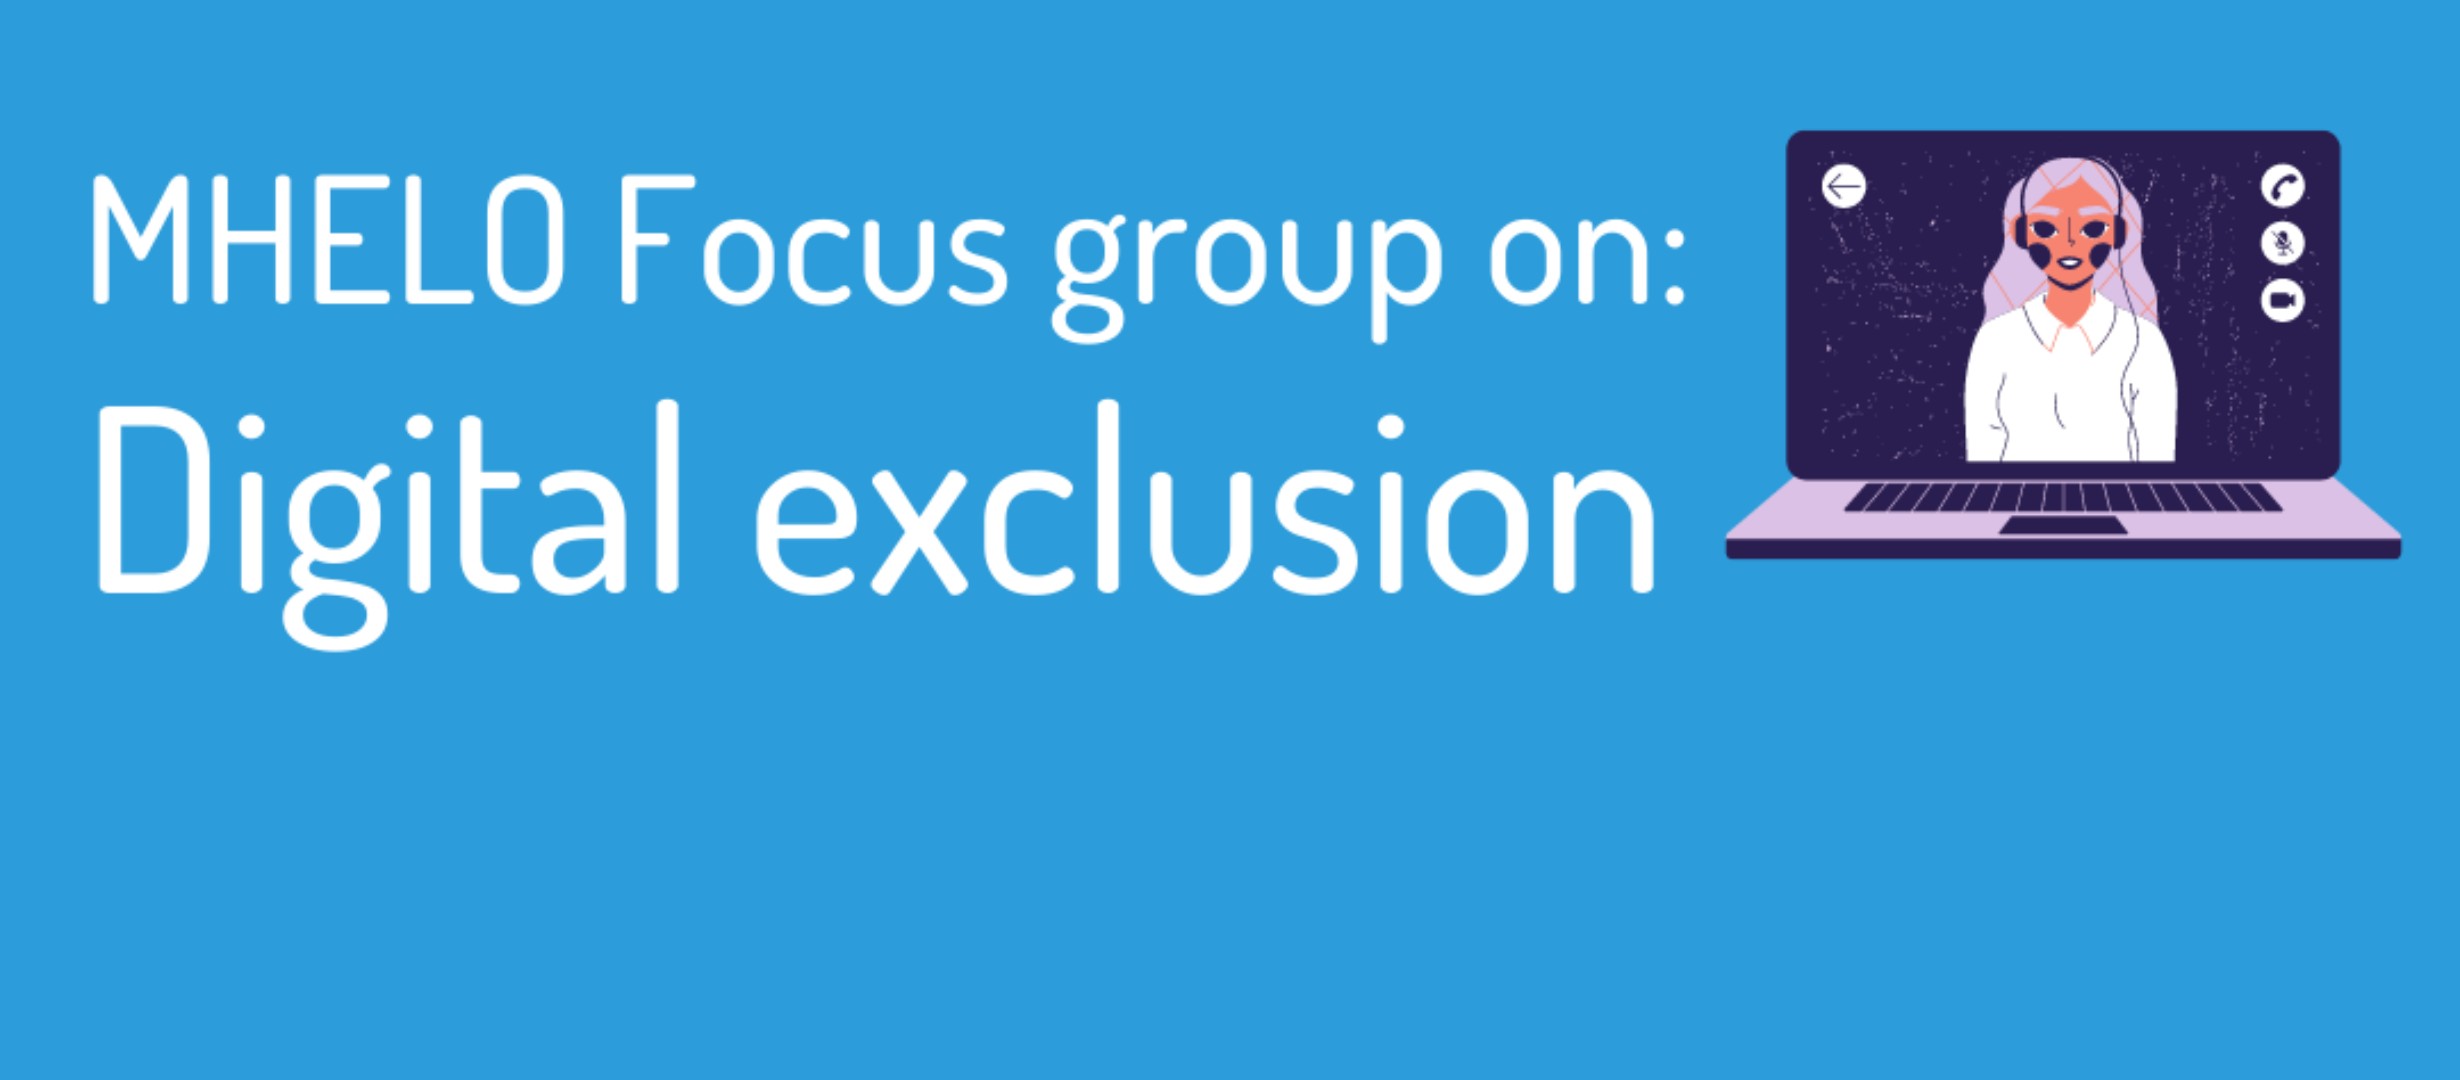 MHELO focus group on: Digital Exclusion 